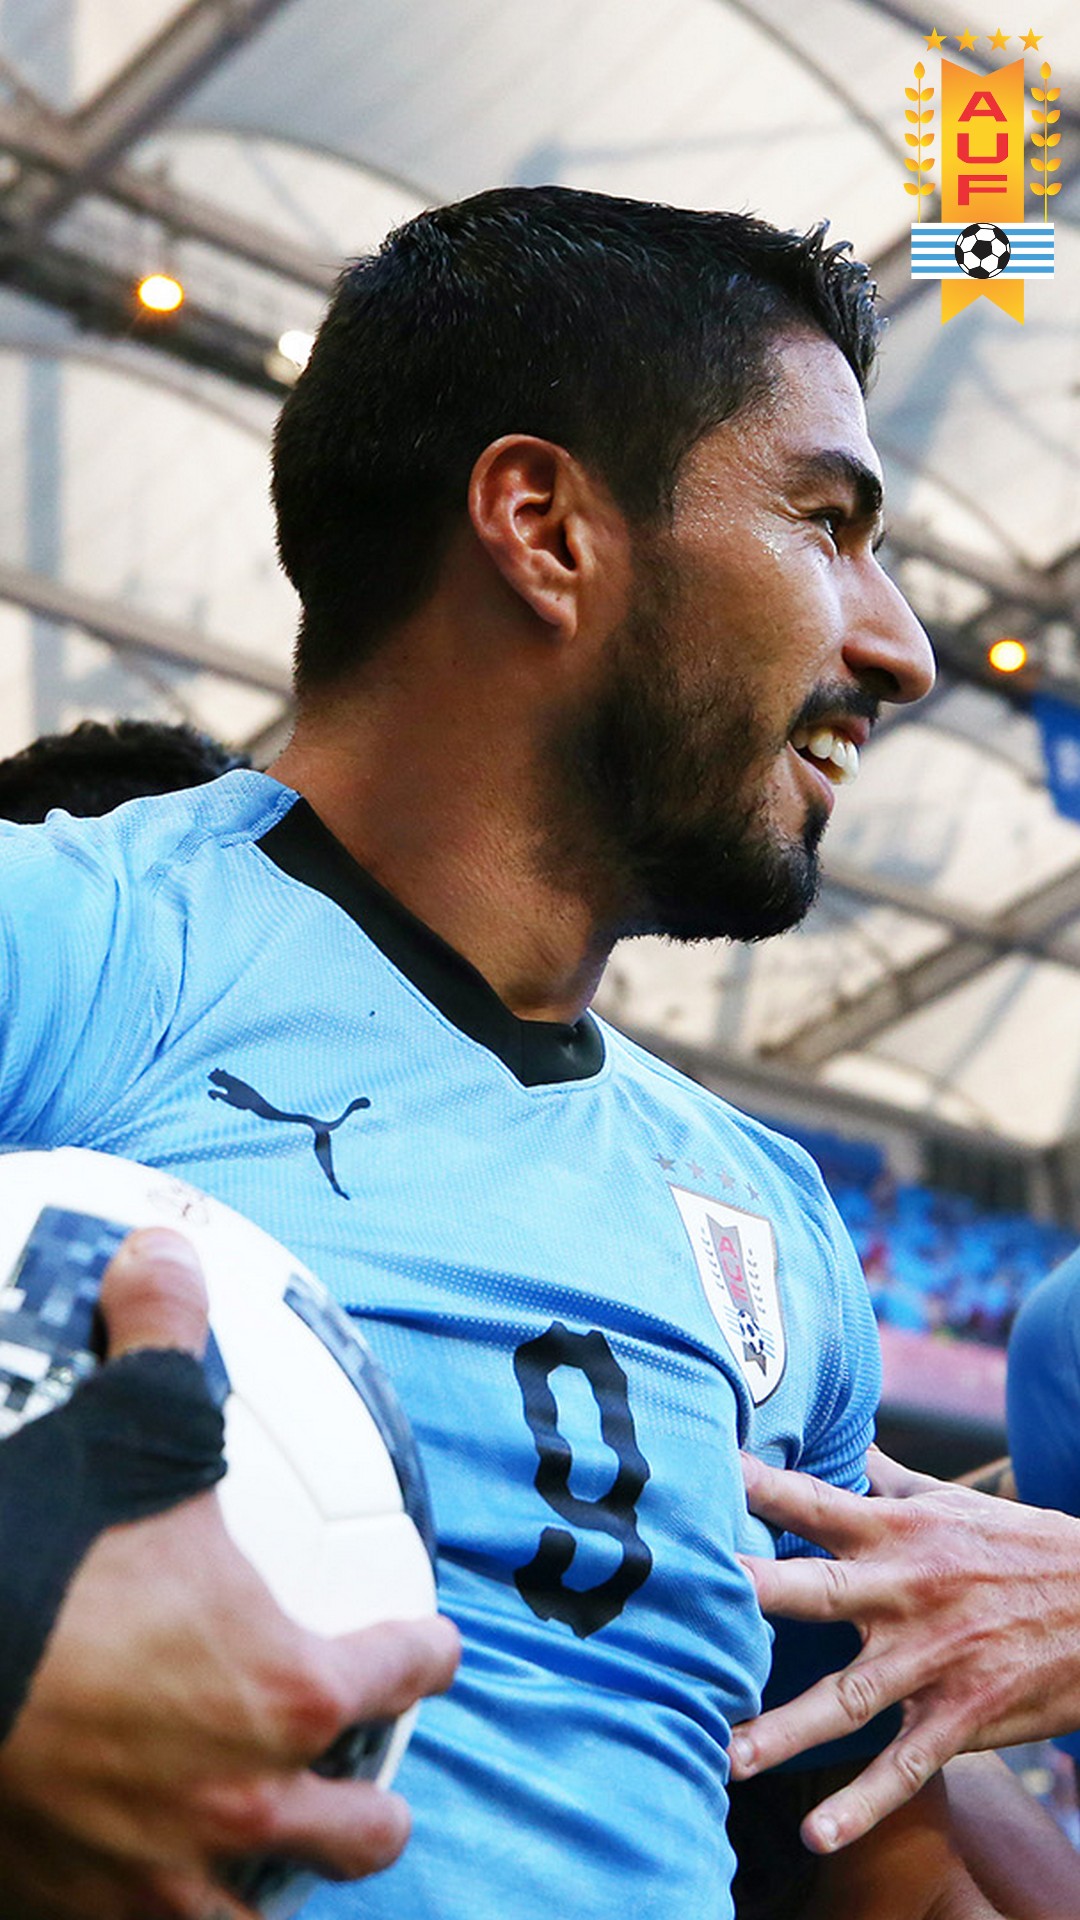 Luis Suarez Uruguay Mobile Wallpaper HD With Resolution 1080X1920 pixel. You can make this wallpaper for your Mac or Windows Desktop Background, iPhone, Android or Tablet and another Smartphone device for free